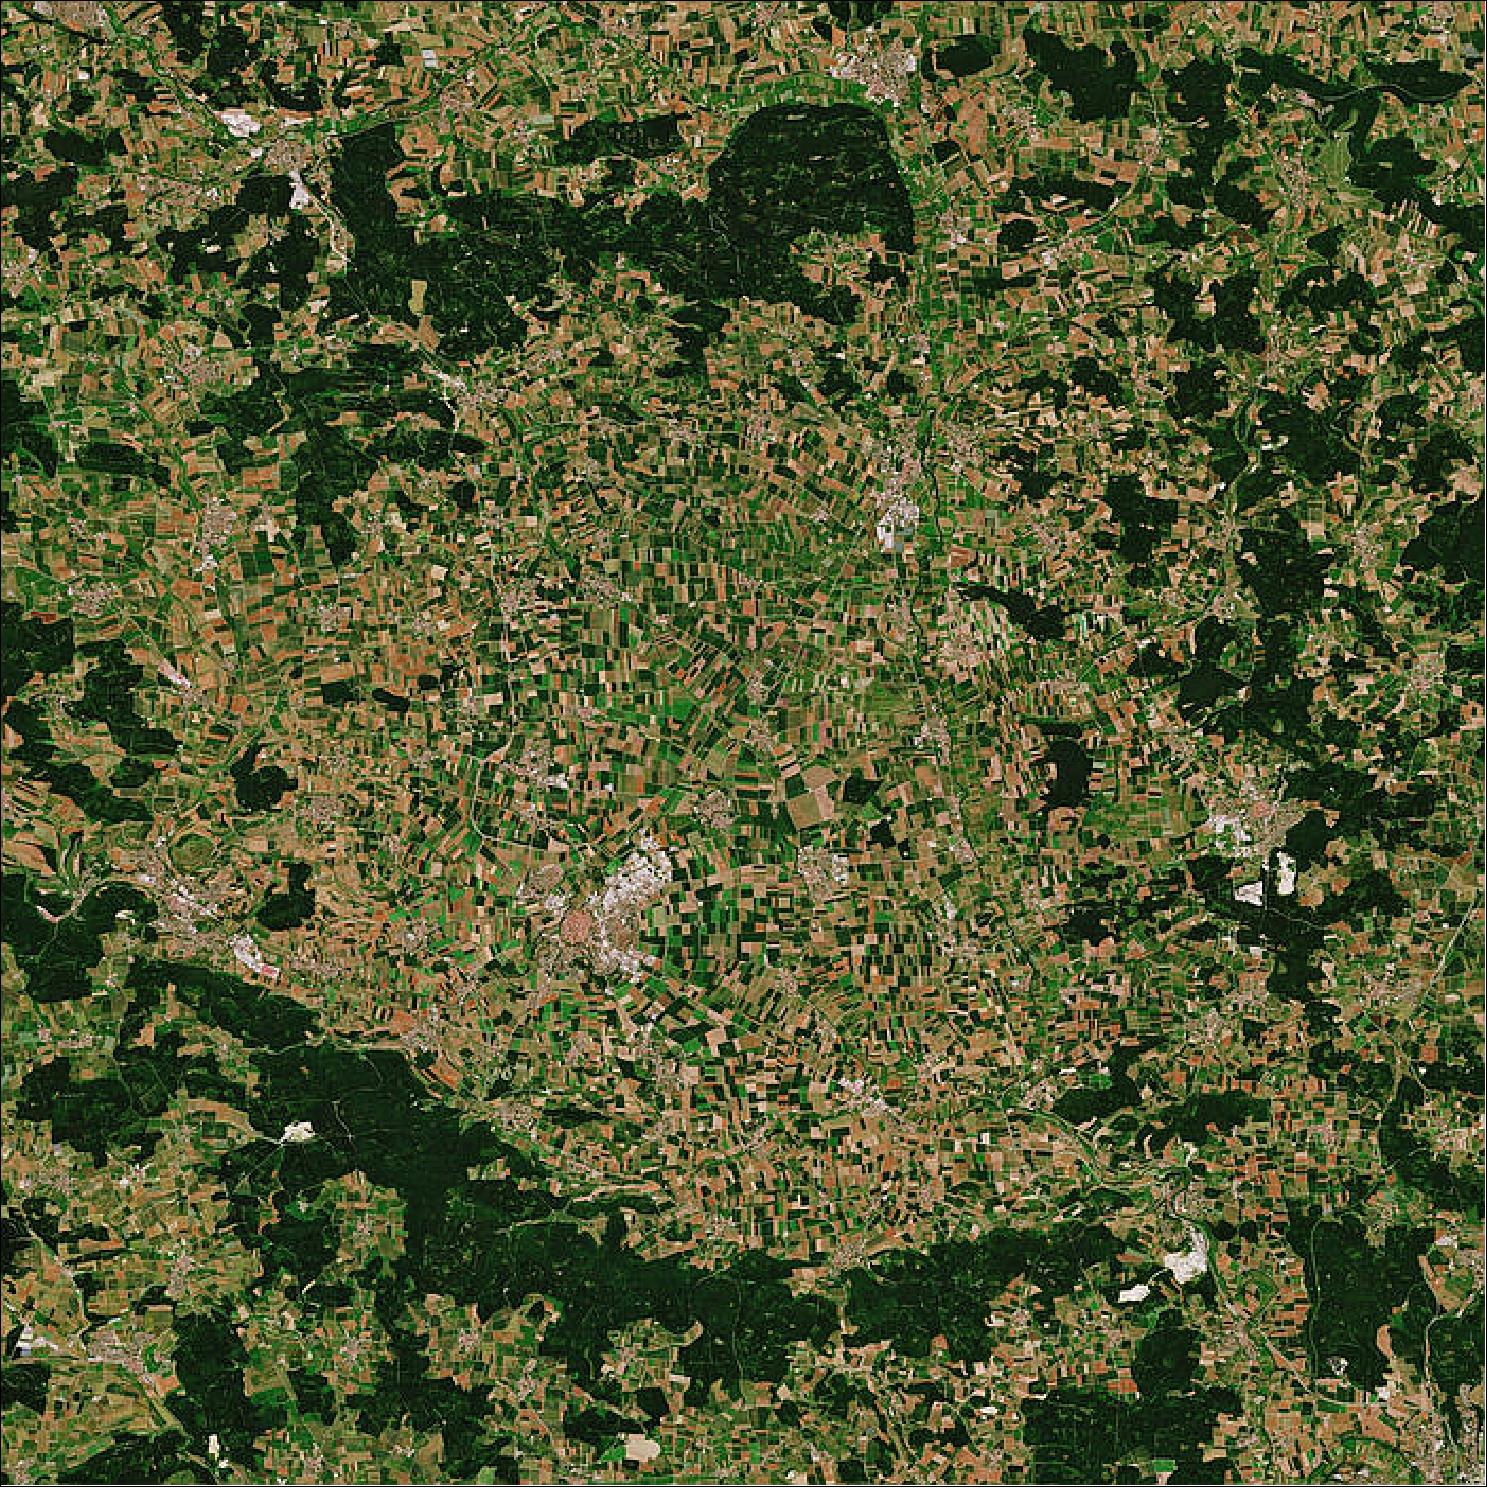 Figure 33: The Sentinel-2 satellite of ESA captured this image of the Nördlinger Ries on 1 July 2018, it is also featured on the Earth from Space video program (image credit: ESA, the image contains modified Copernicus Sentinel data (2018), processed by ESA, CC BY-SA 3.0 IGO)